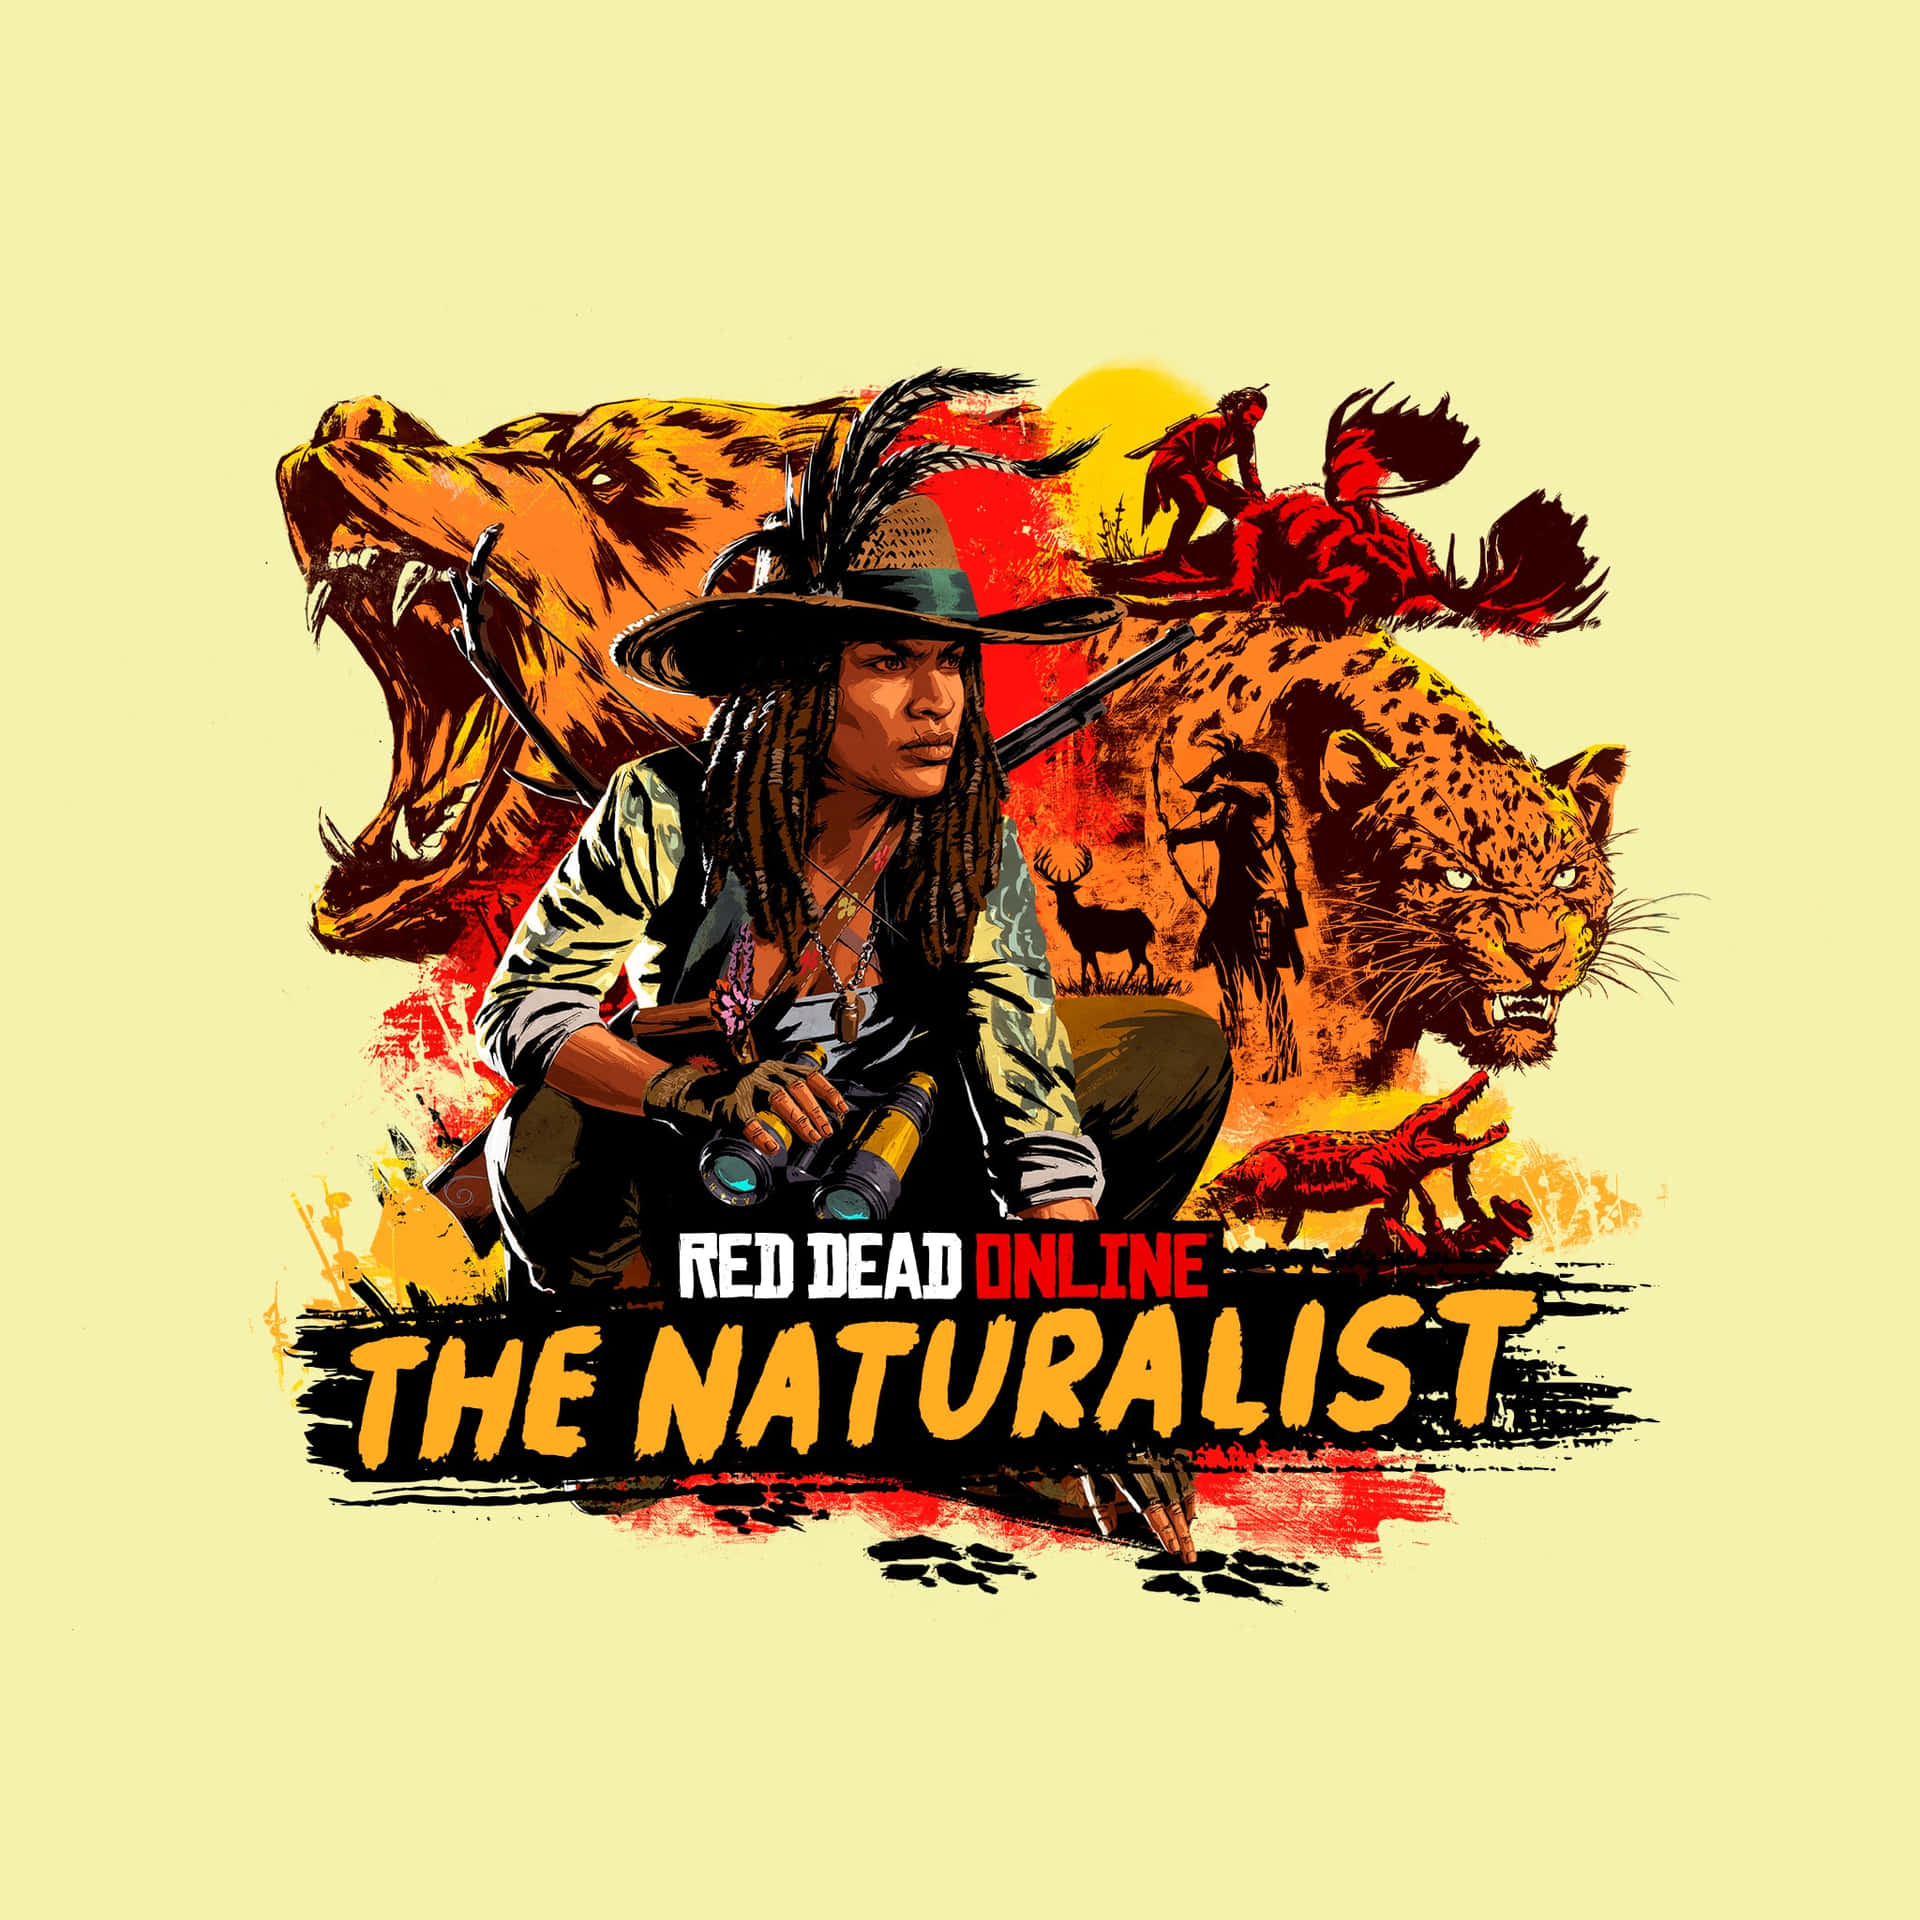 Best Red Dead Redemption 2 Poster For The Naturalist DLC Background